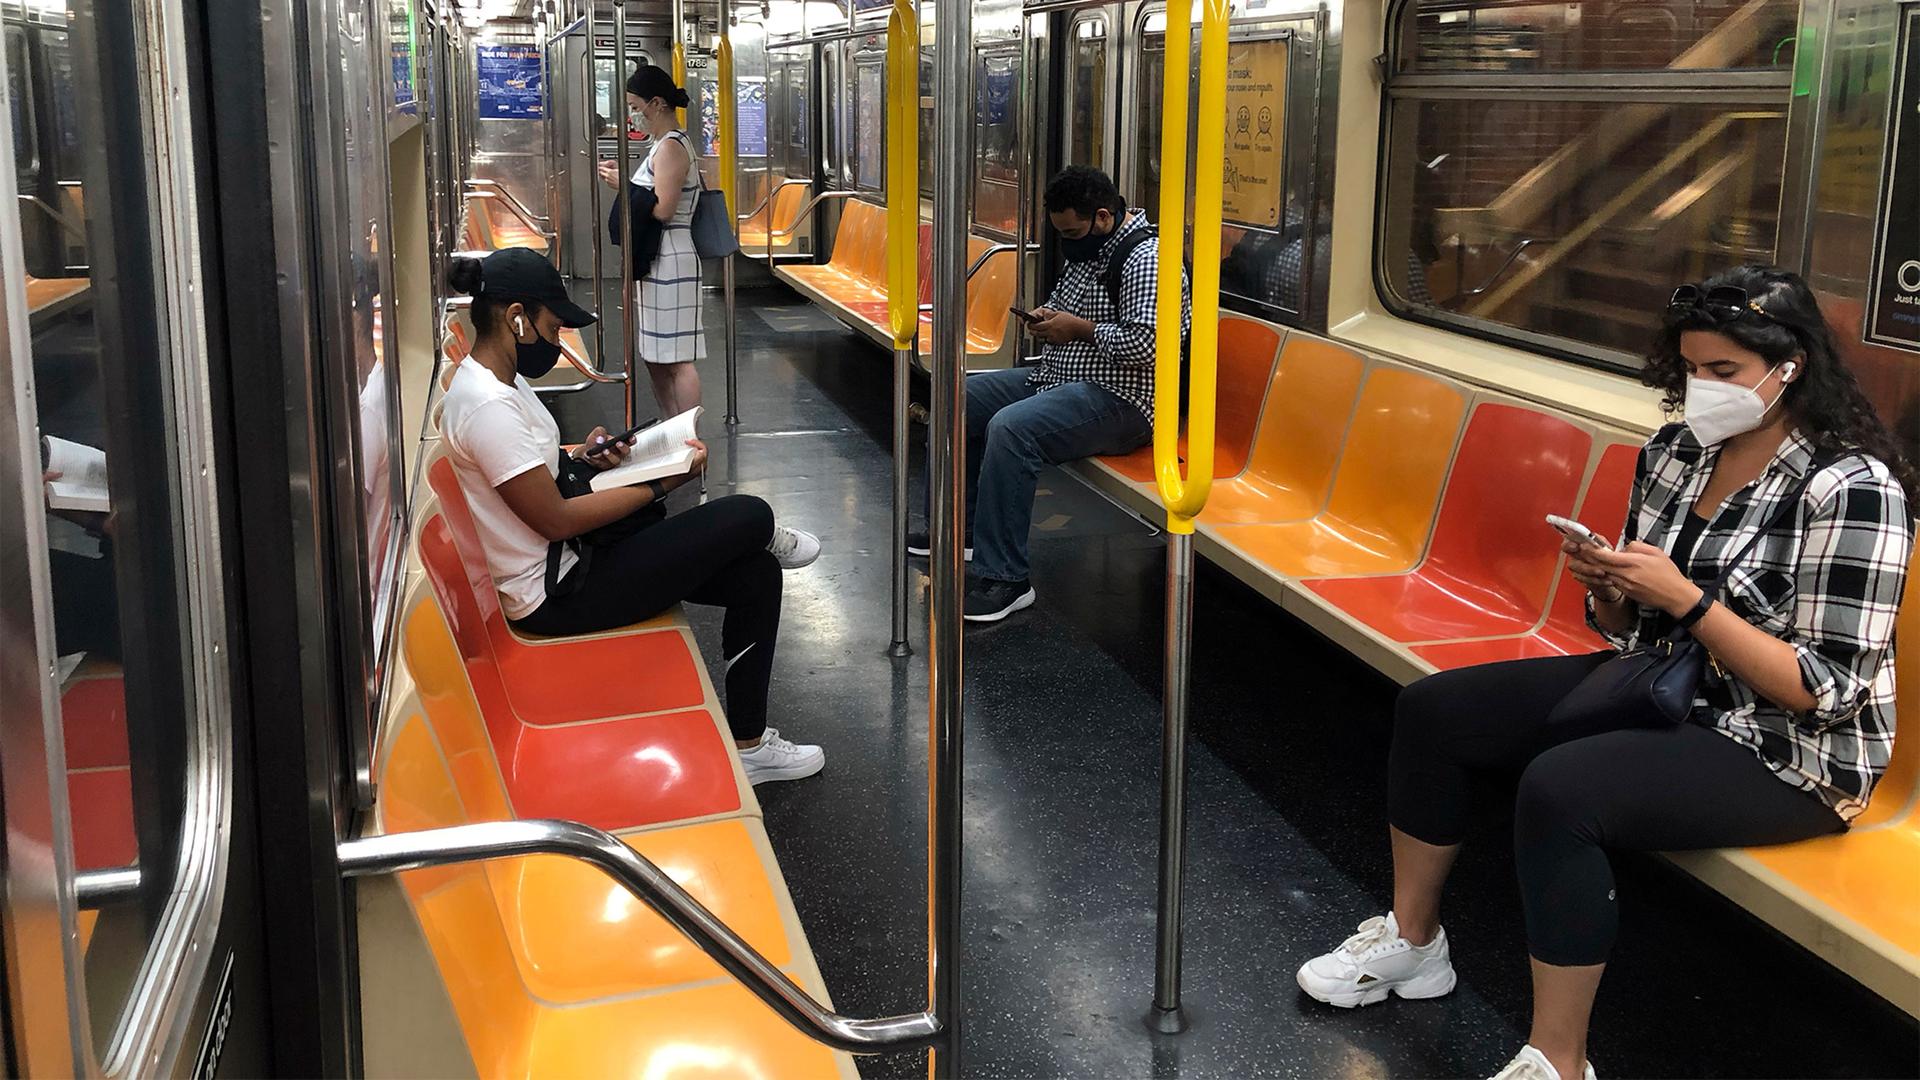 People wearing different types of black and white clothes sit and stand among orange and yellow seats on the New York subway